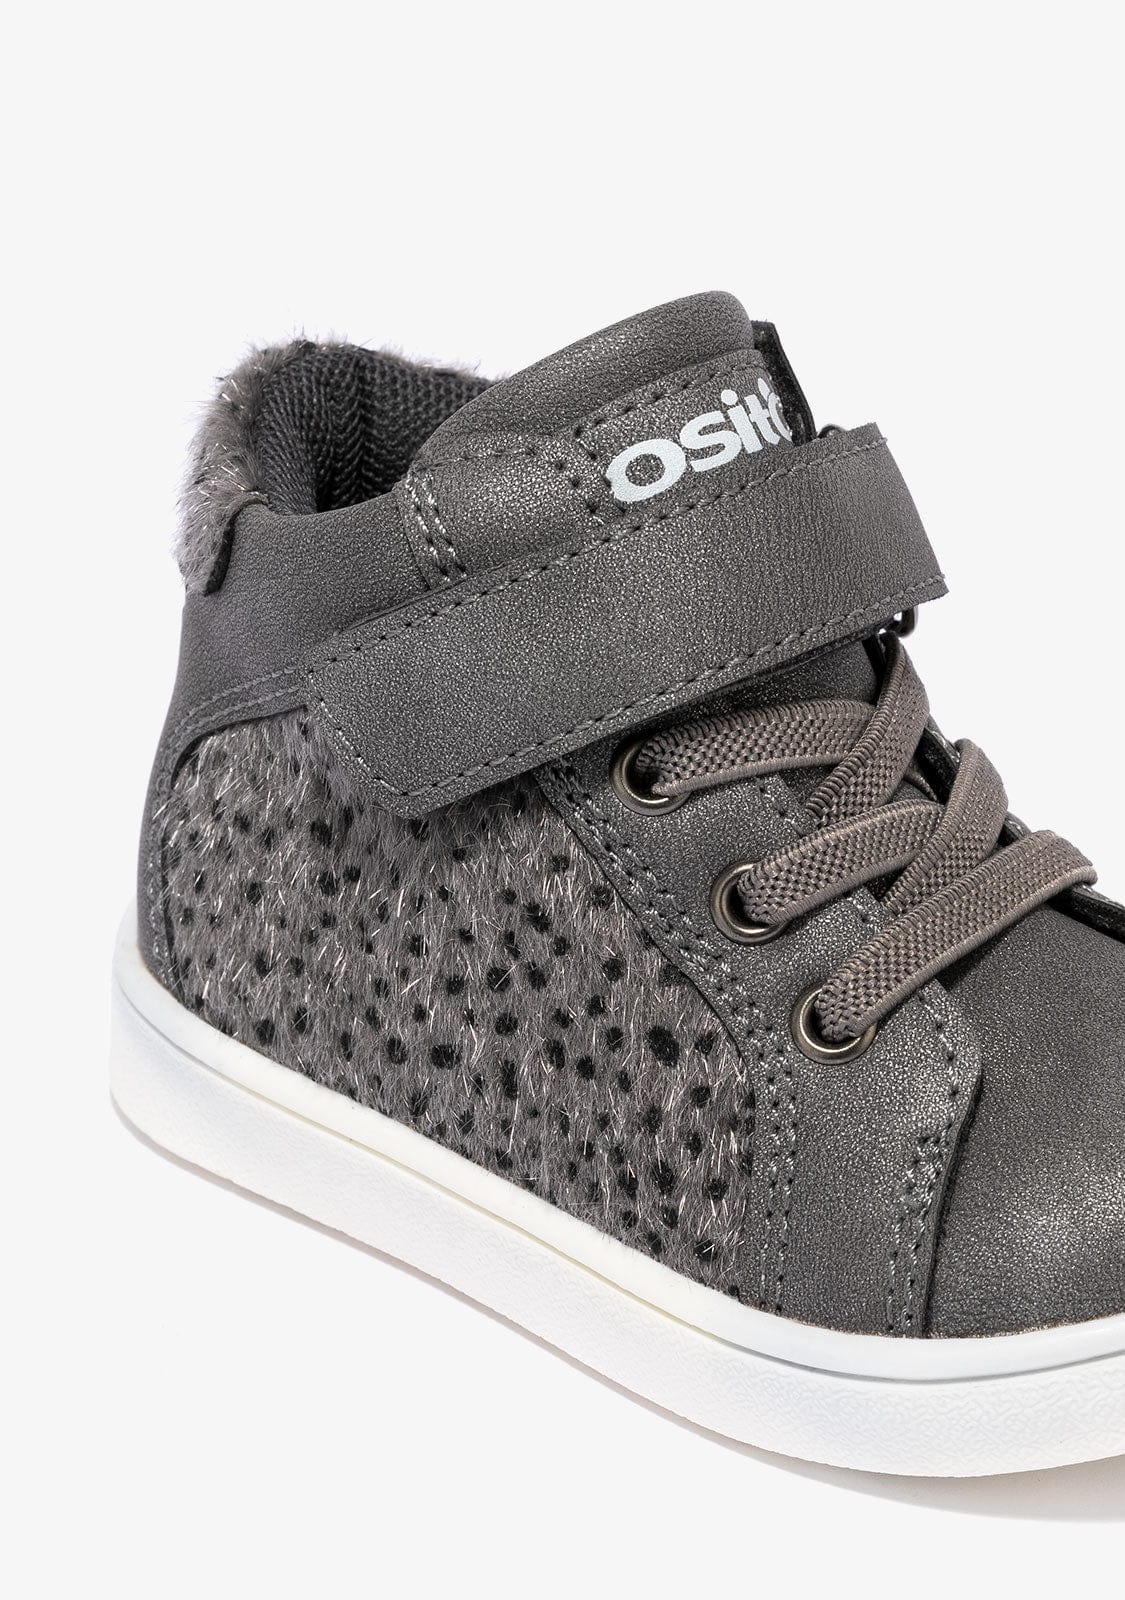 OSITO shoes Baby's Pewter Ankle Boots